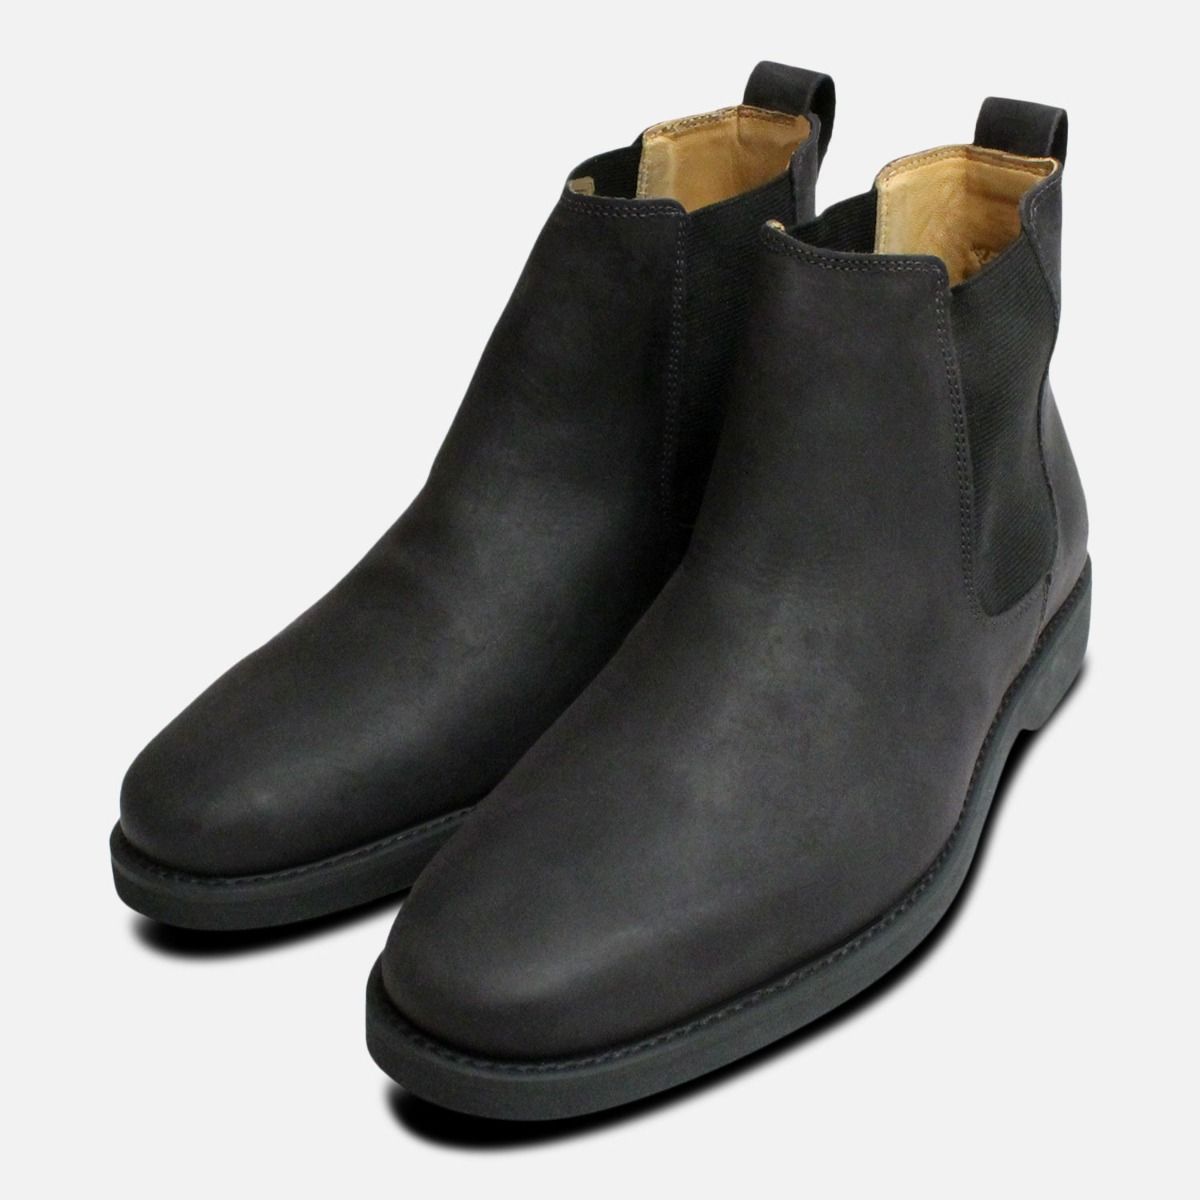 MENS ANATOMIC & CO SLIP ON SMART ELASTICATED GUSSET CHELSEA ANKLE BOOTS NATAL